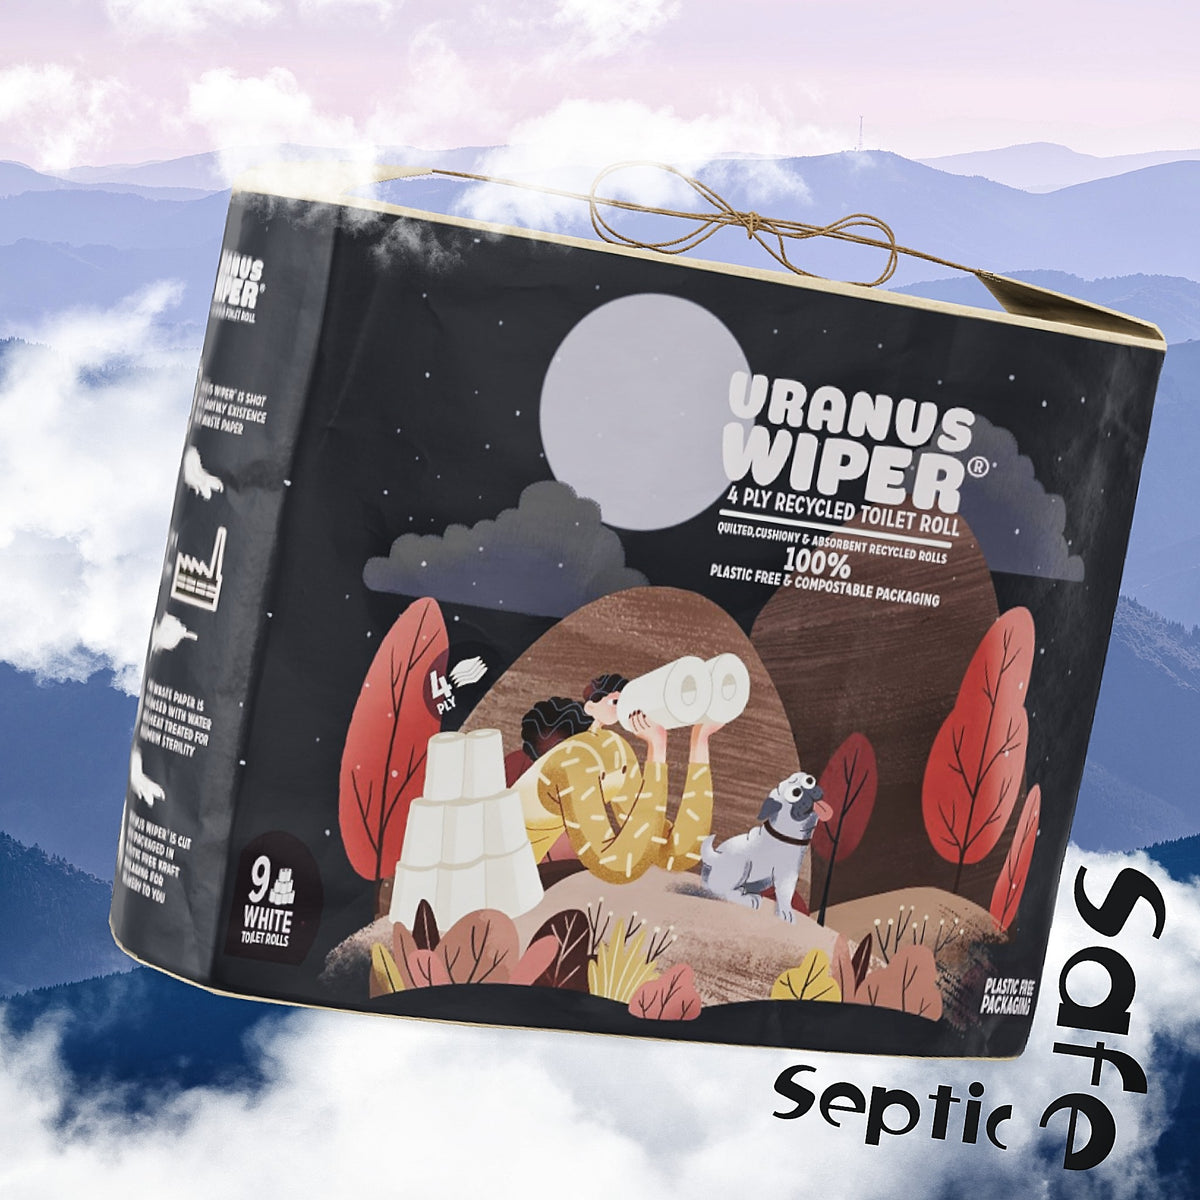 Uranus Wiper recycled toilet roll with no plastic in the clouds